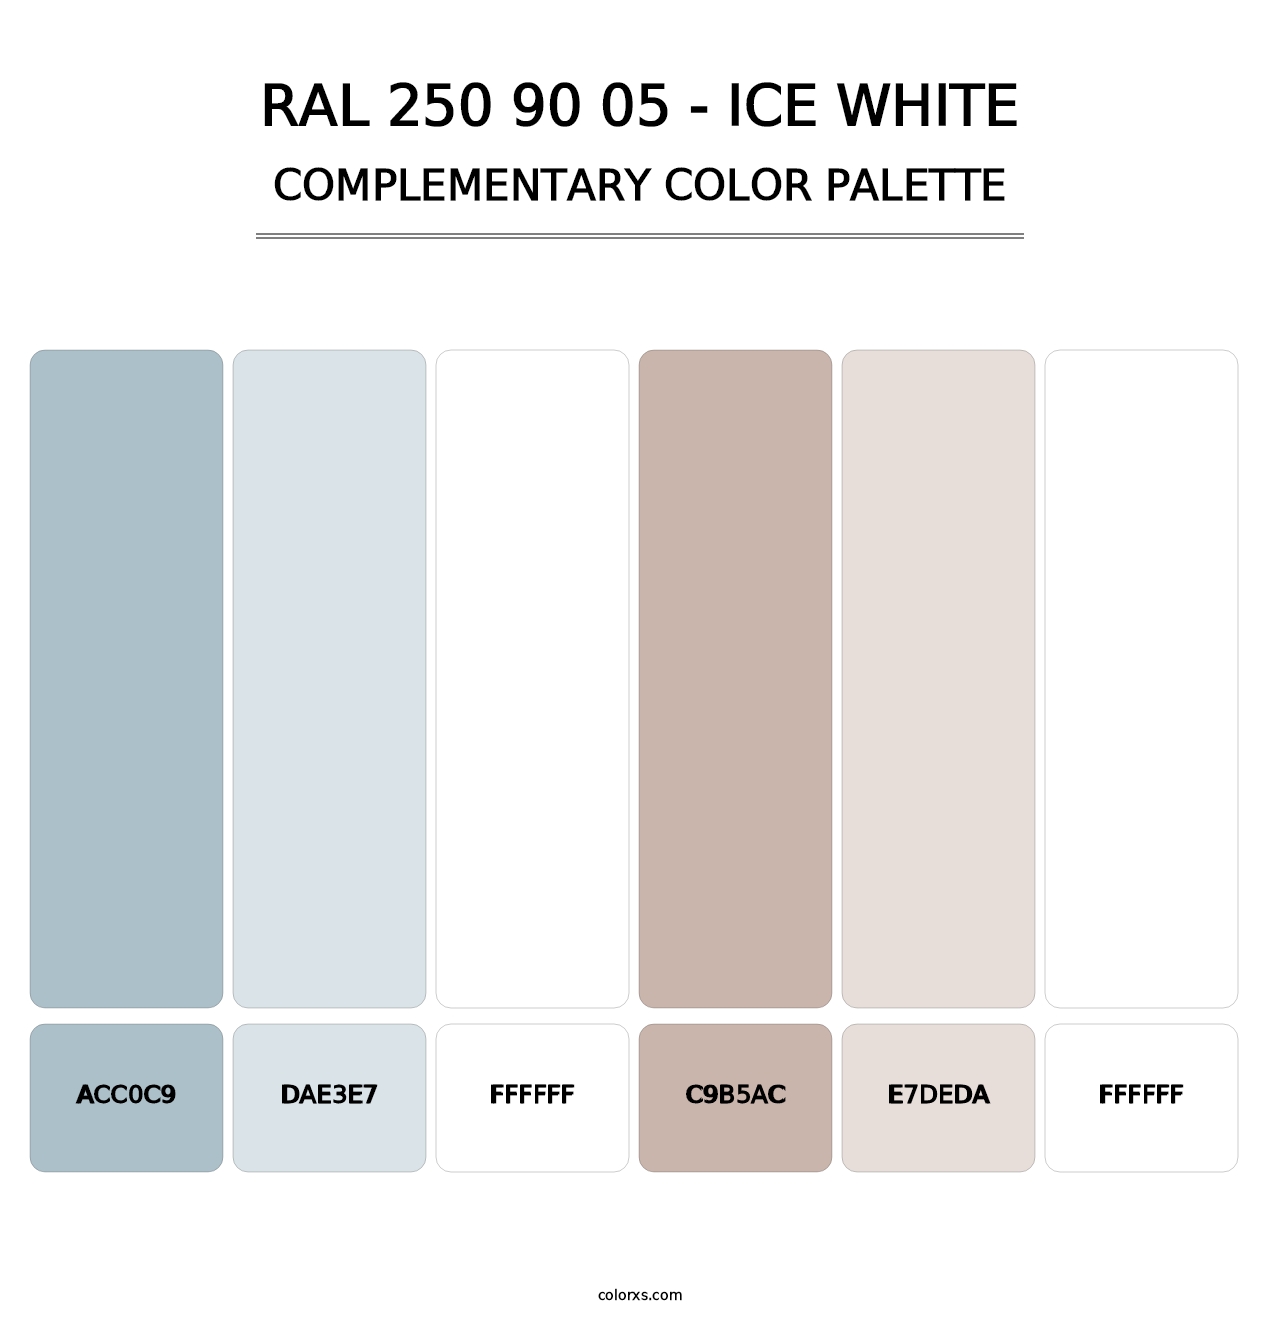 RAL 250 90 05 - Ice White - Complementary Color Palette